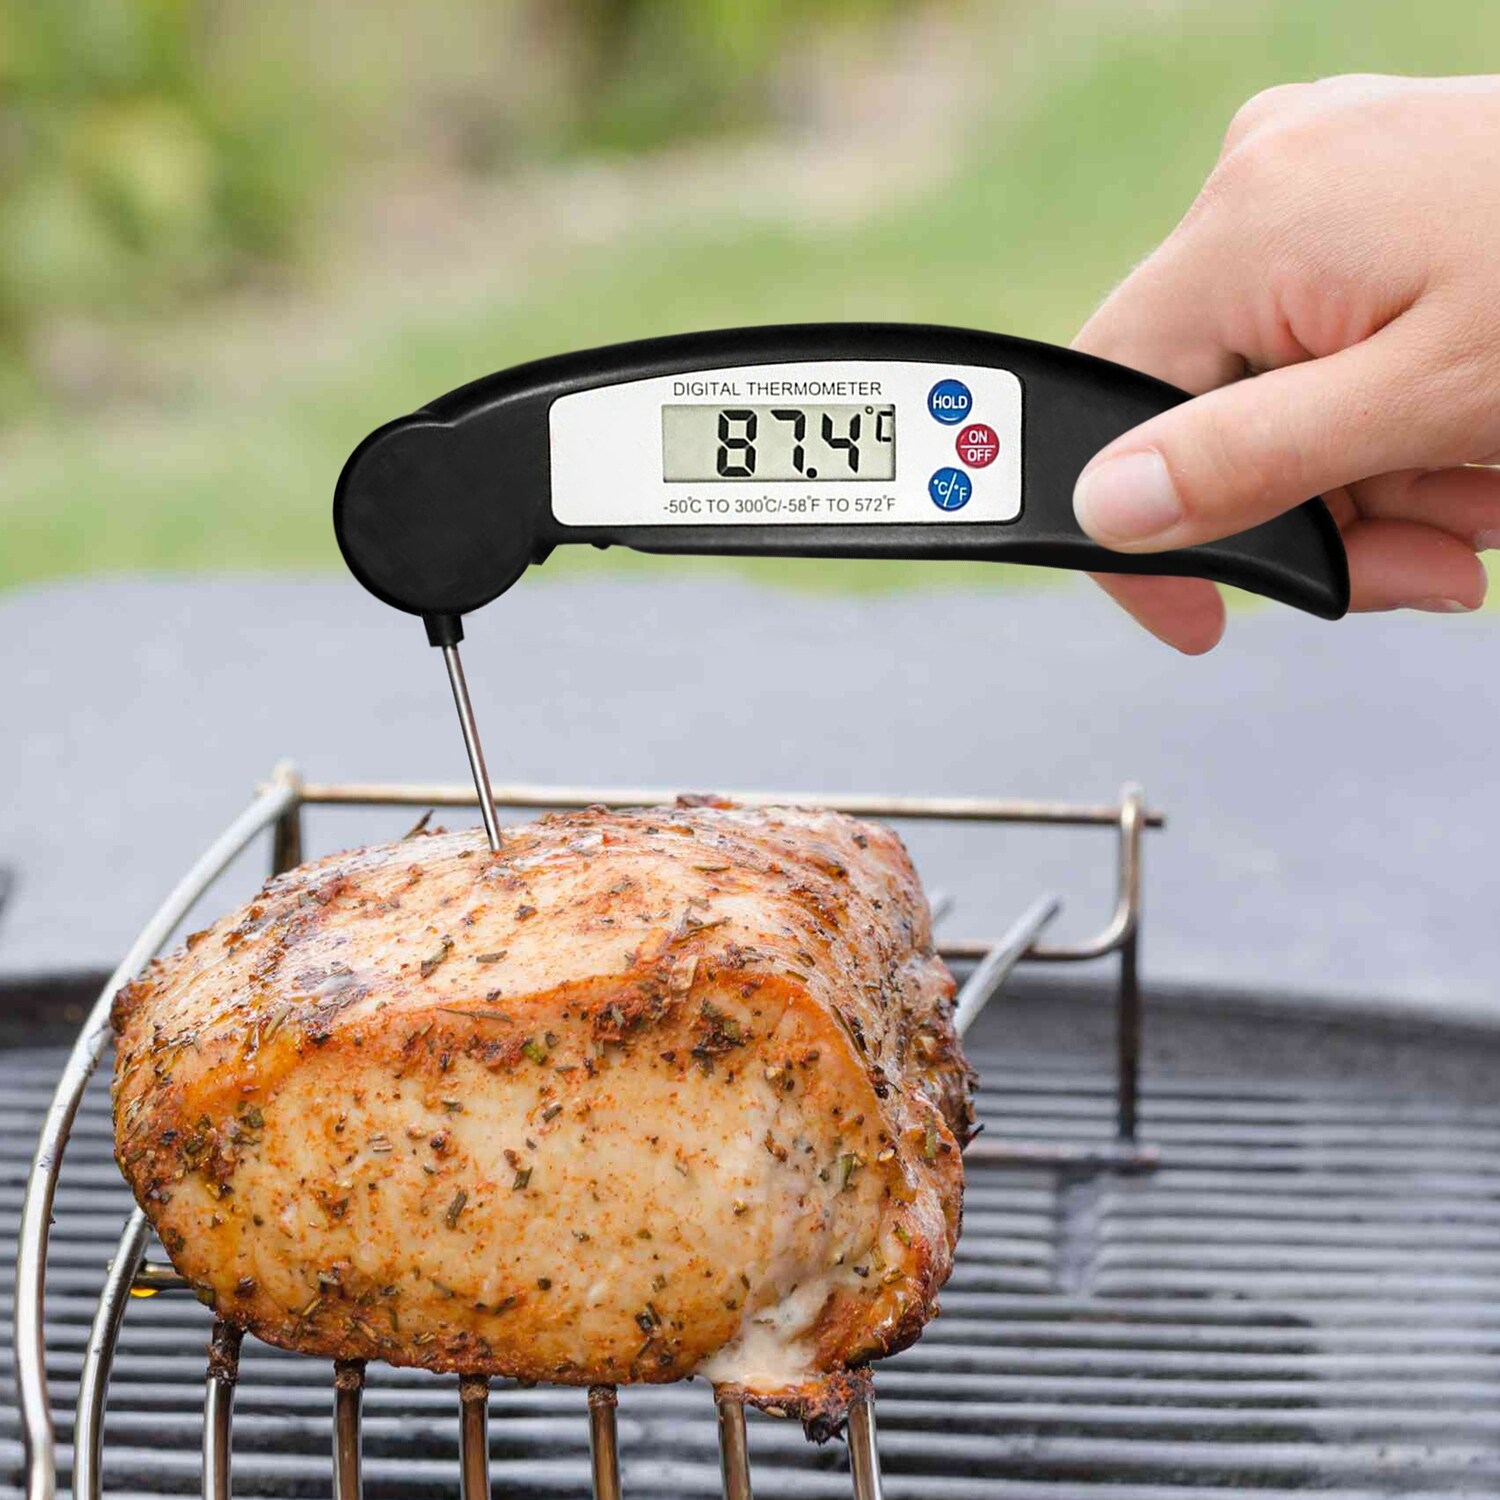 https://ak1.ostkcdn.com/images/products/is/images/direct/0cb34d4c4175795b93903e1f96e2164898ac499b/Instant-Read-Digital-Food-Thermometer.jpg